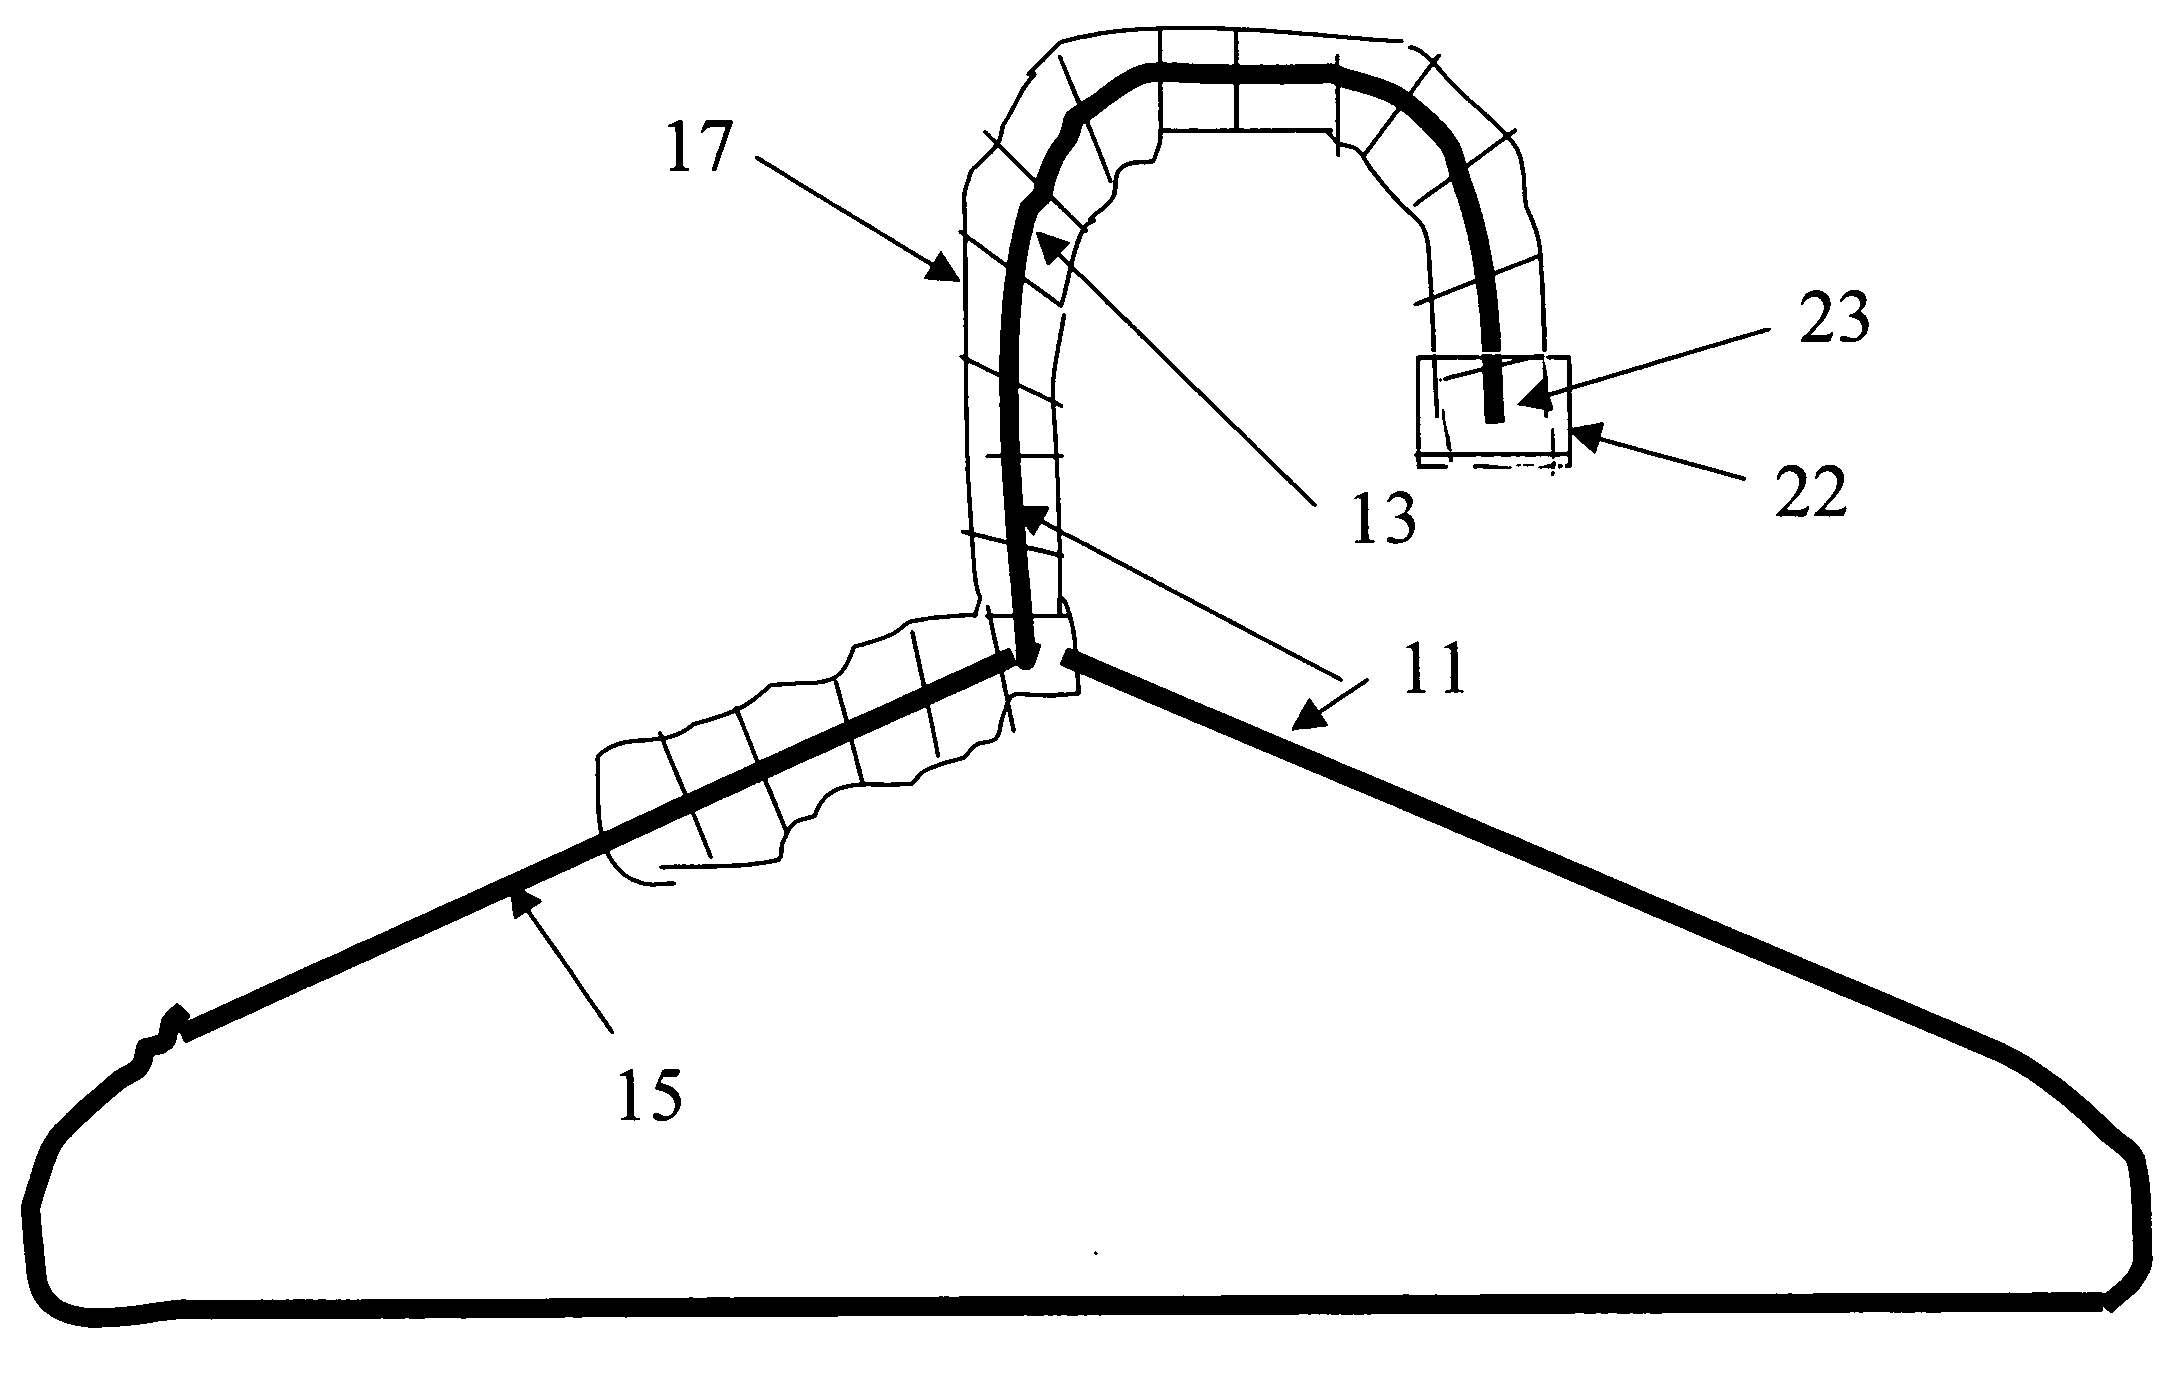 Device for coupling clothing hangers together and providing a comfortable grip for carrying